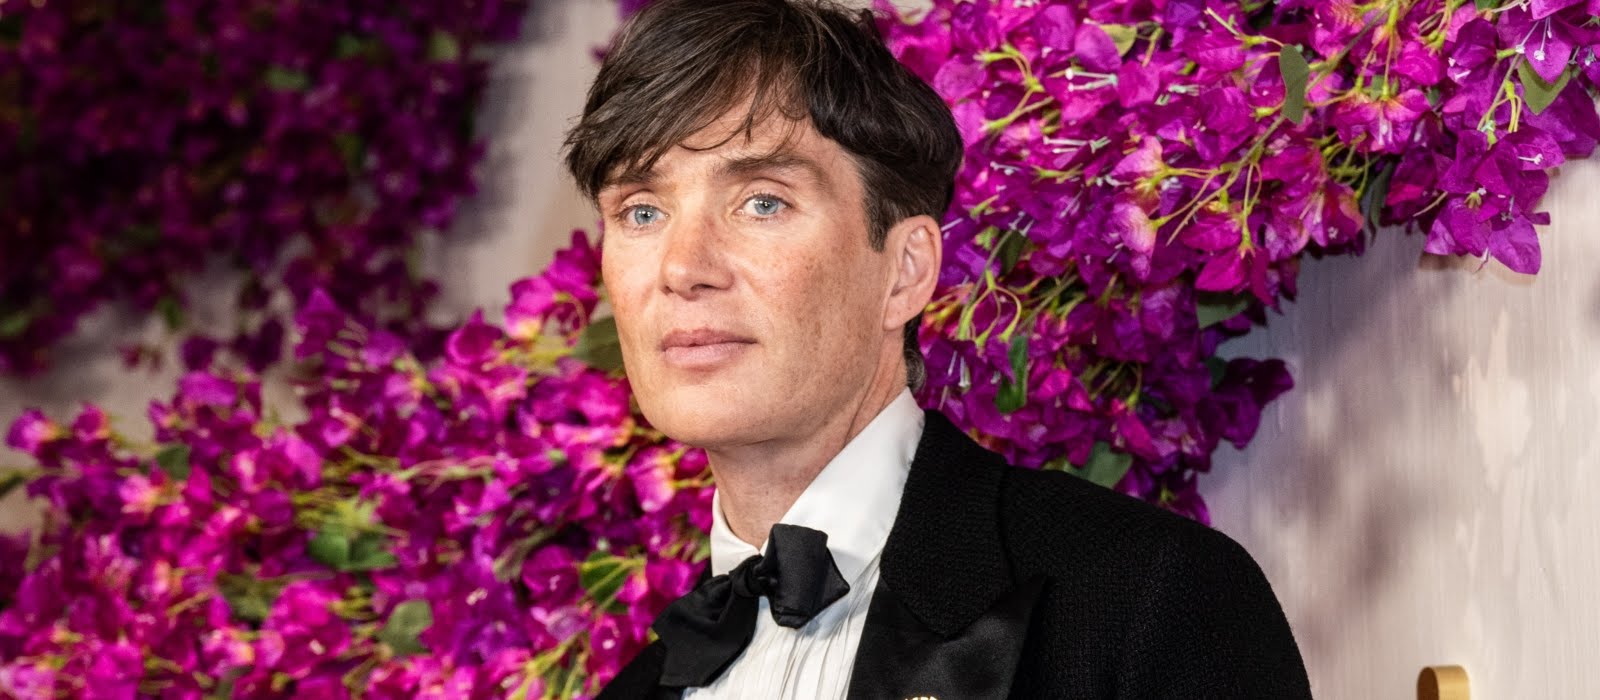 Cillian Murphy wins Best Actor while Irish-produced Poor Things scoops 4 Oscar wins